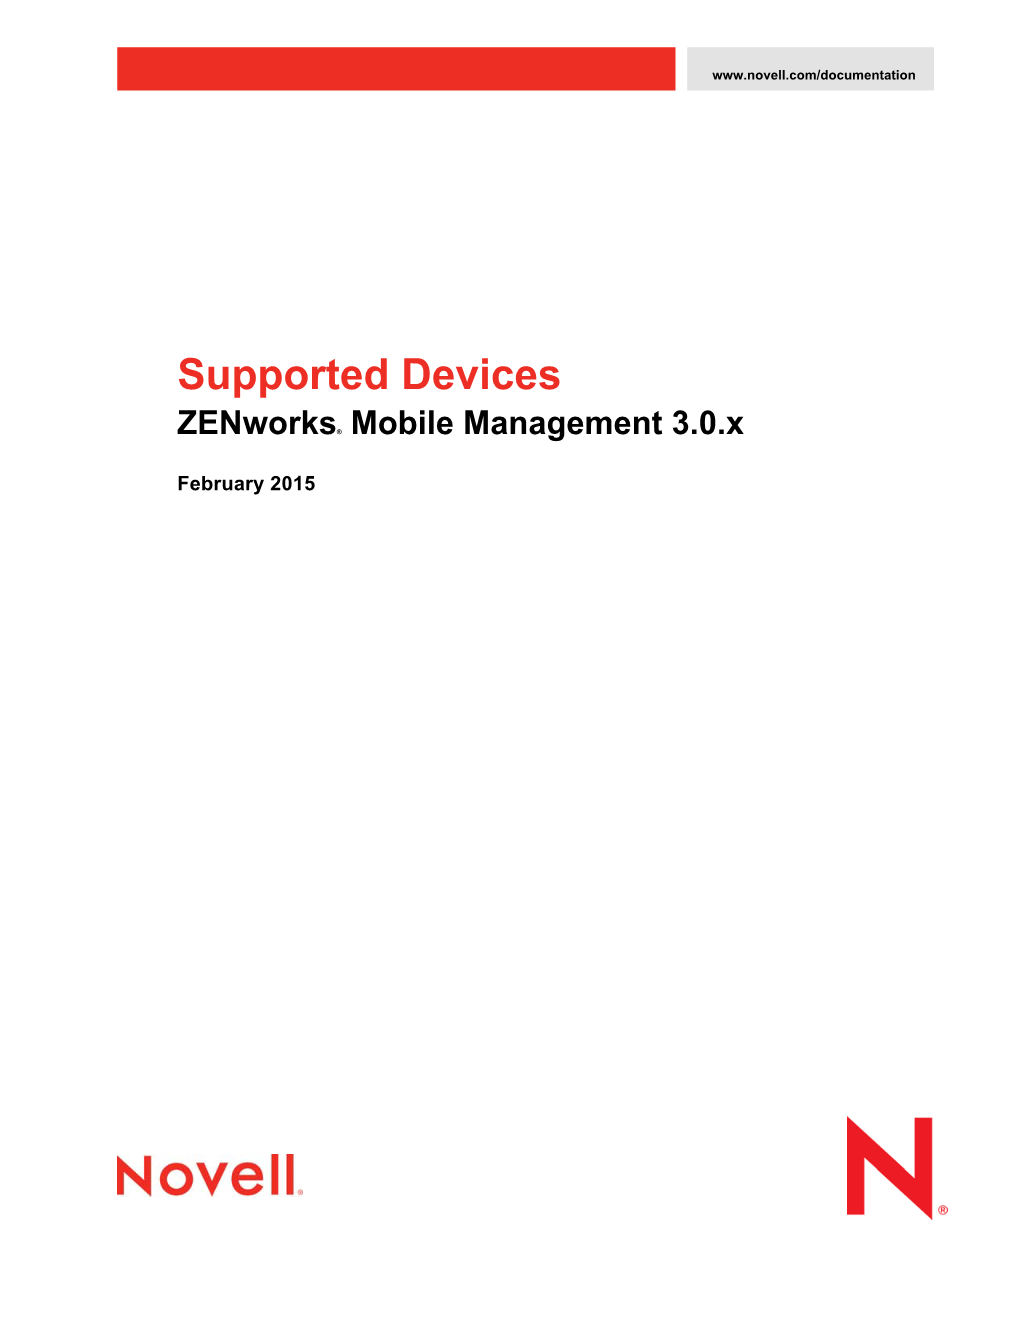 Zenworks Mobile Management 3.0.X Supported Devices